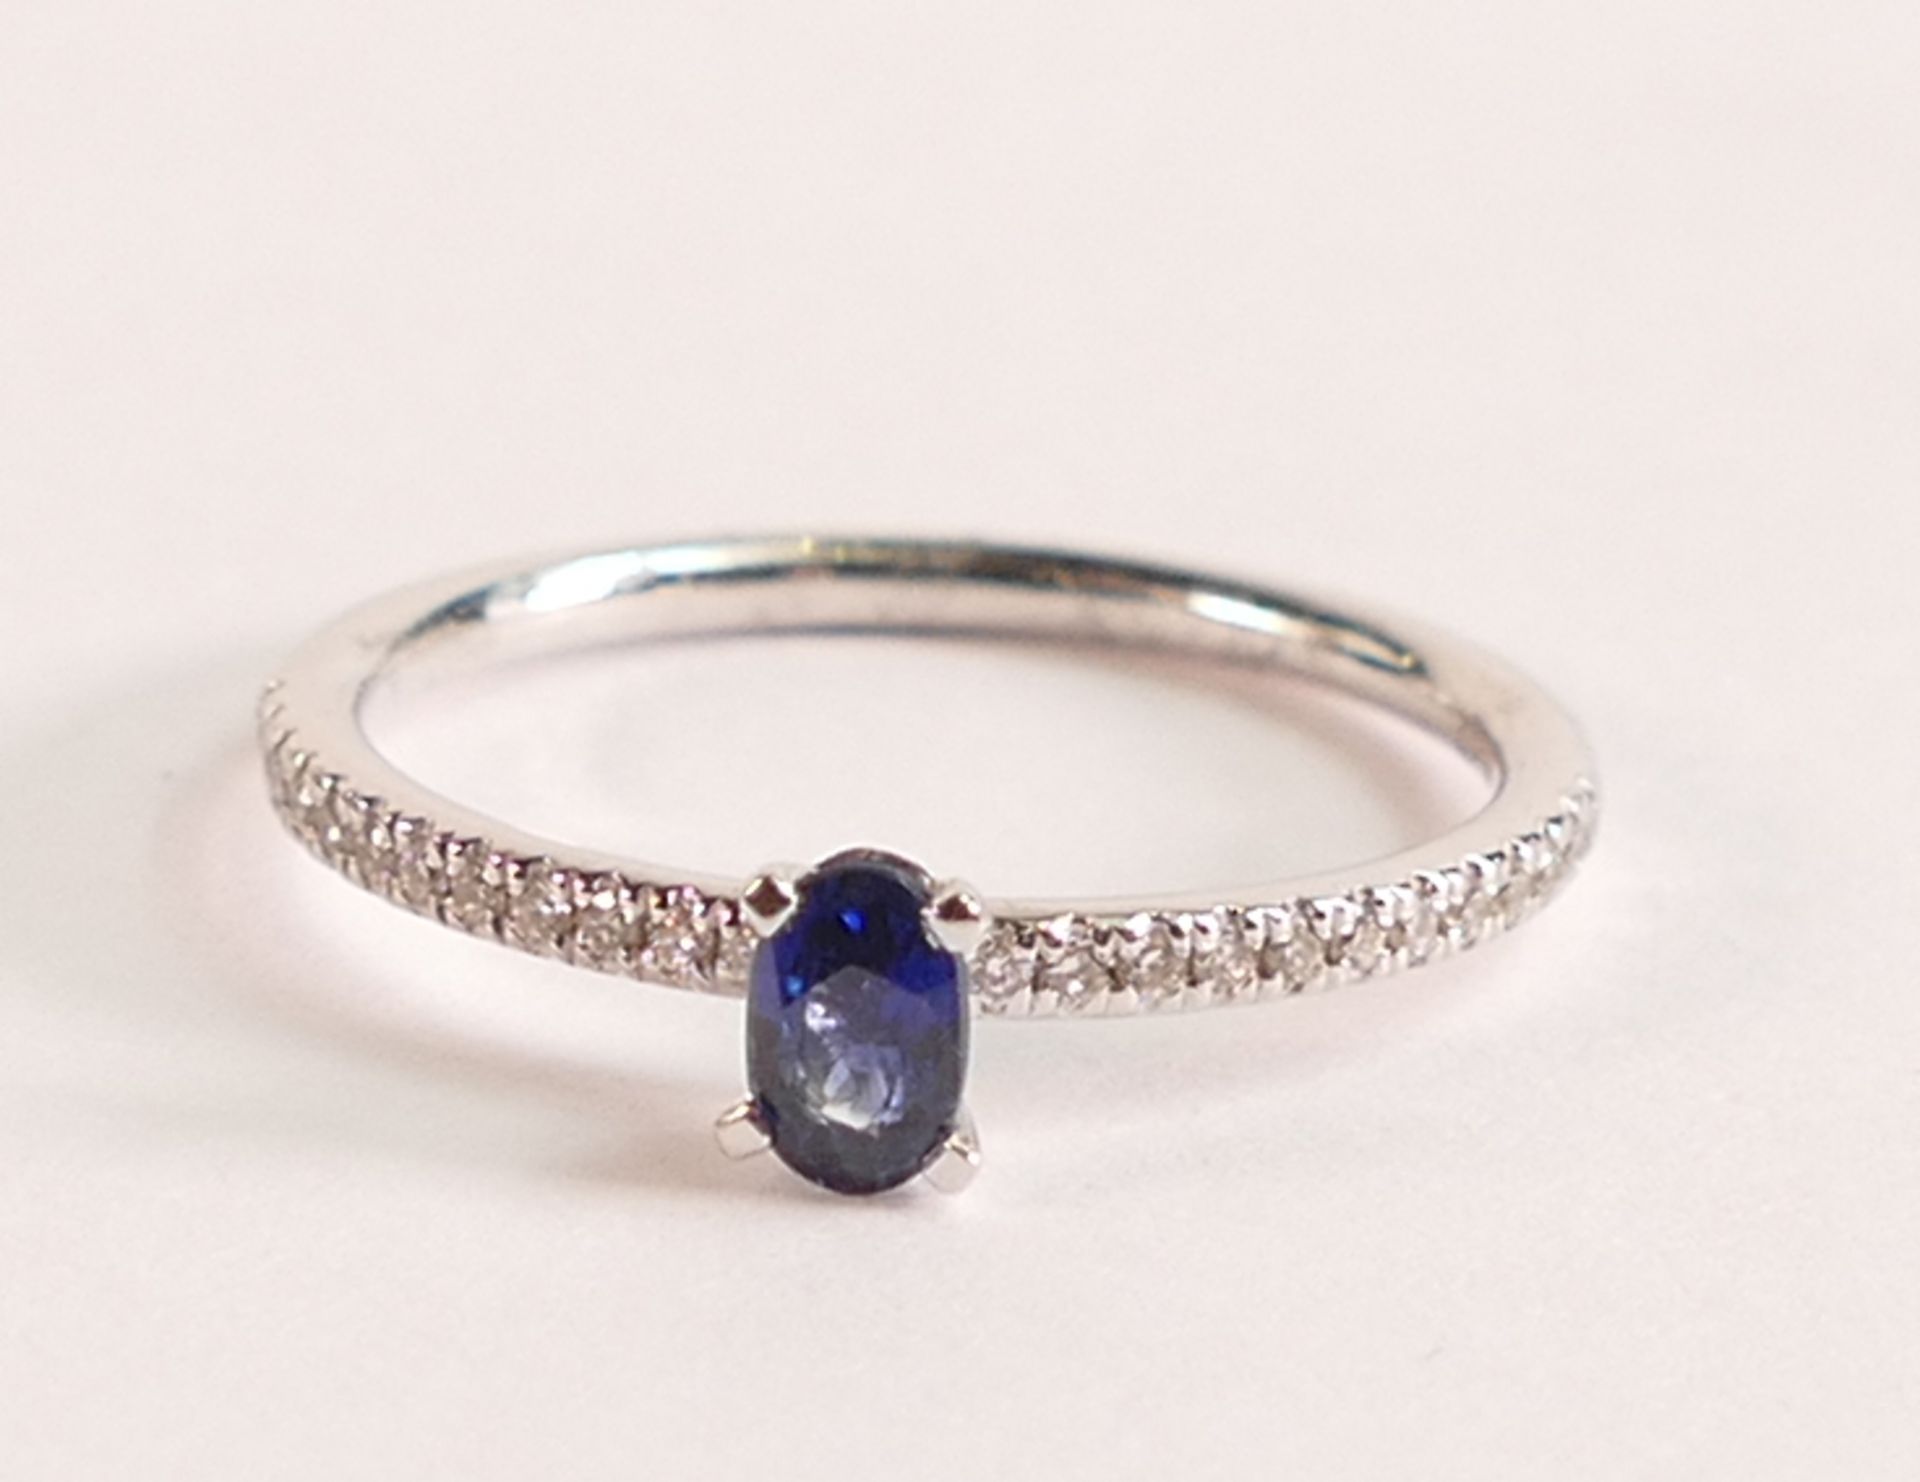 18ct White Gold Ring With Sapphire and Diamond - This elegant ring features a stunning deep blue